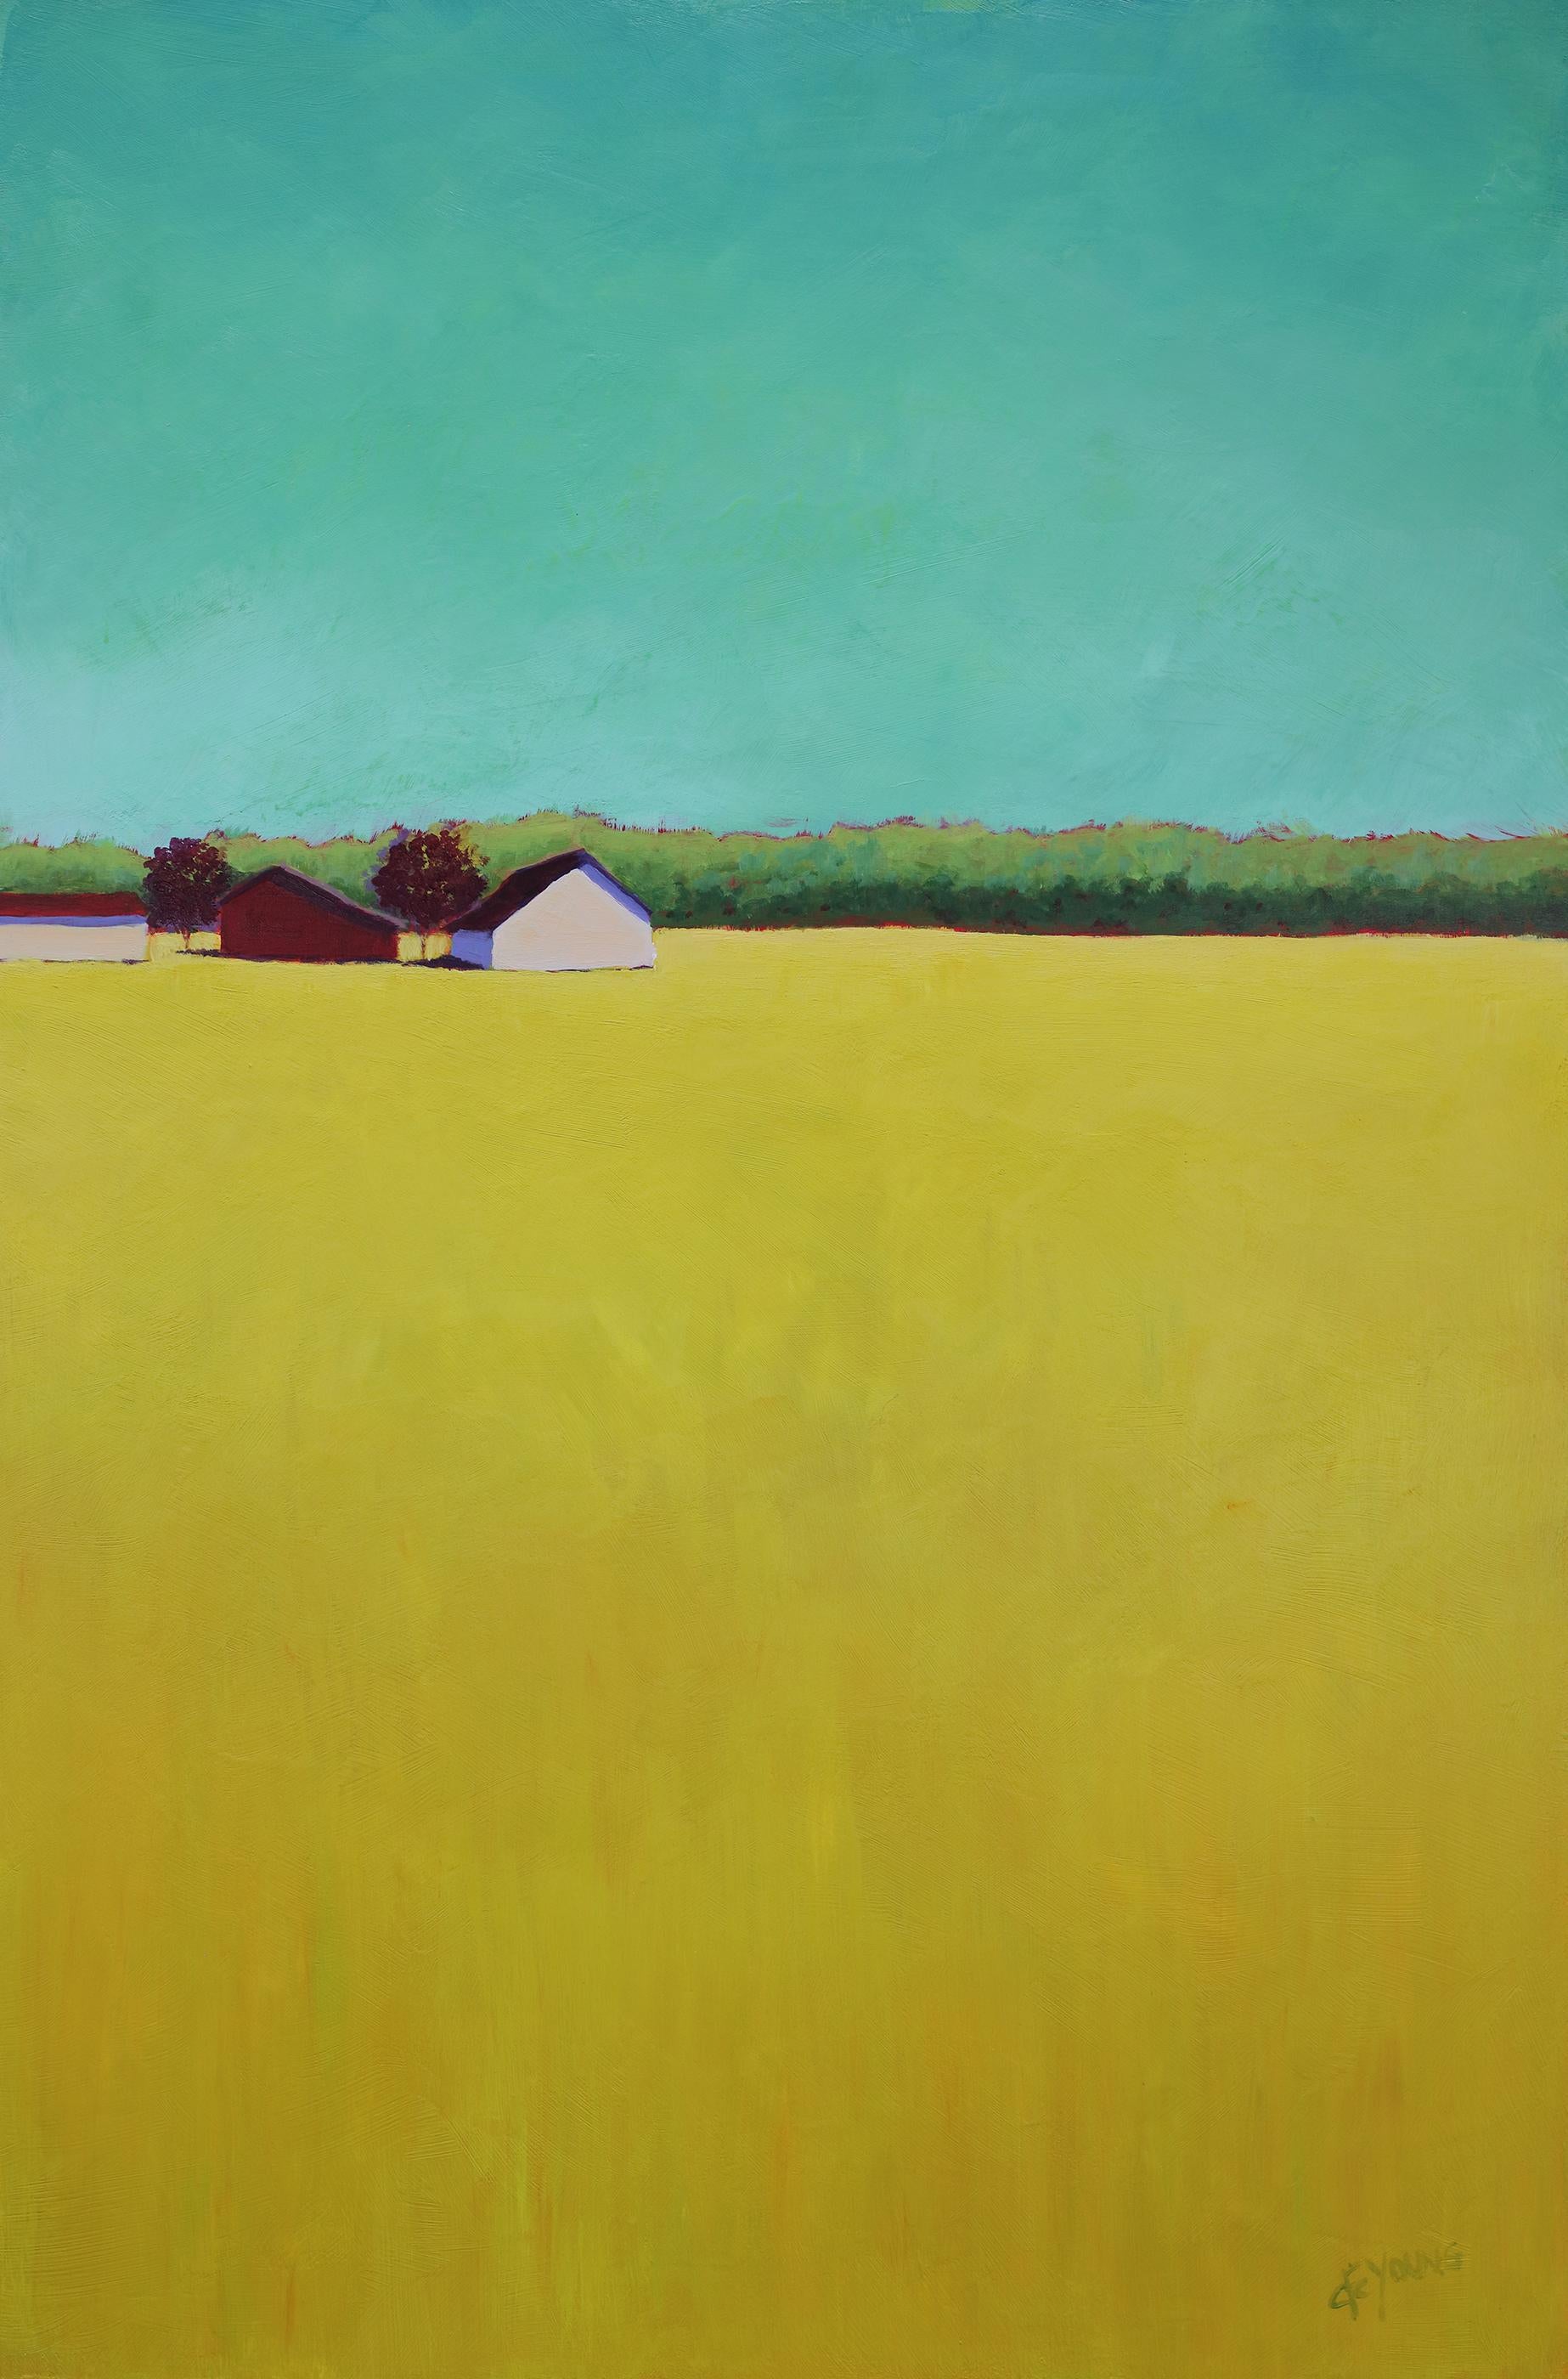 This colorful landscape painting by Carol Young features a vibrant turquoise, yellow-green and red palette, with a high horizon line, green foliage, and small barns. Above and below it are colorful expanses of ground and sky. The painting is made on